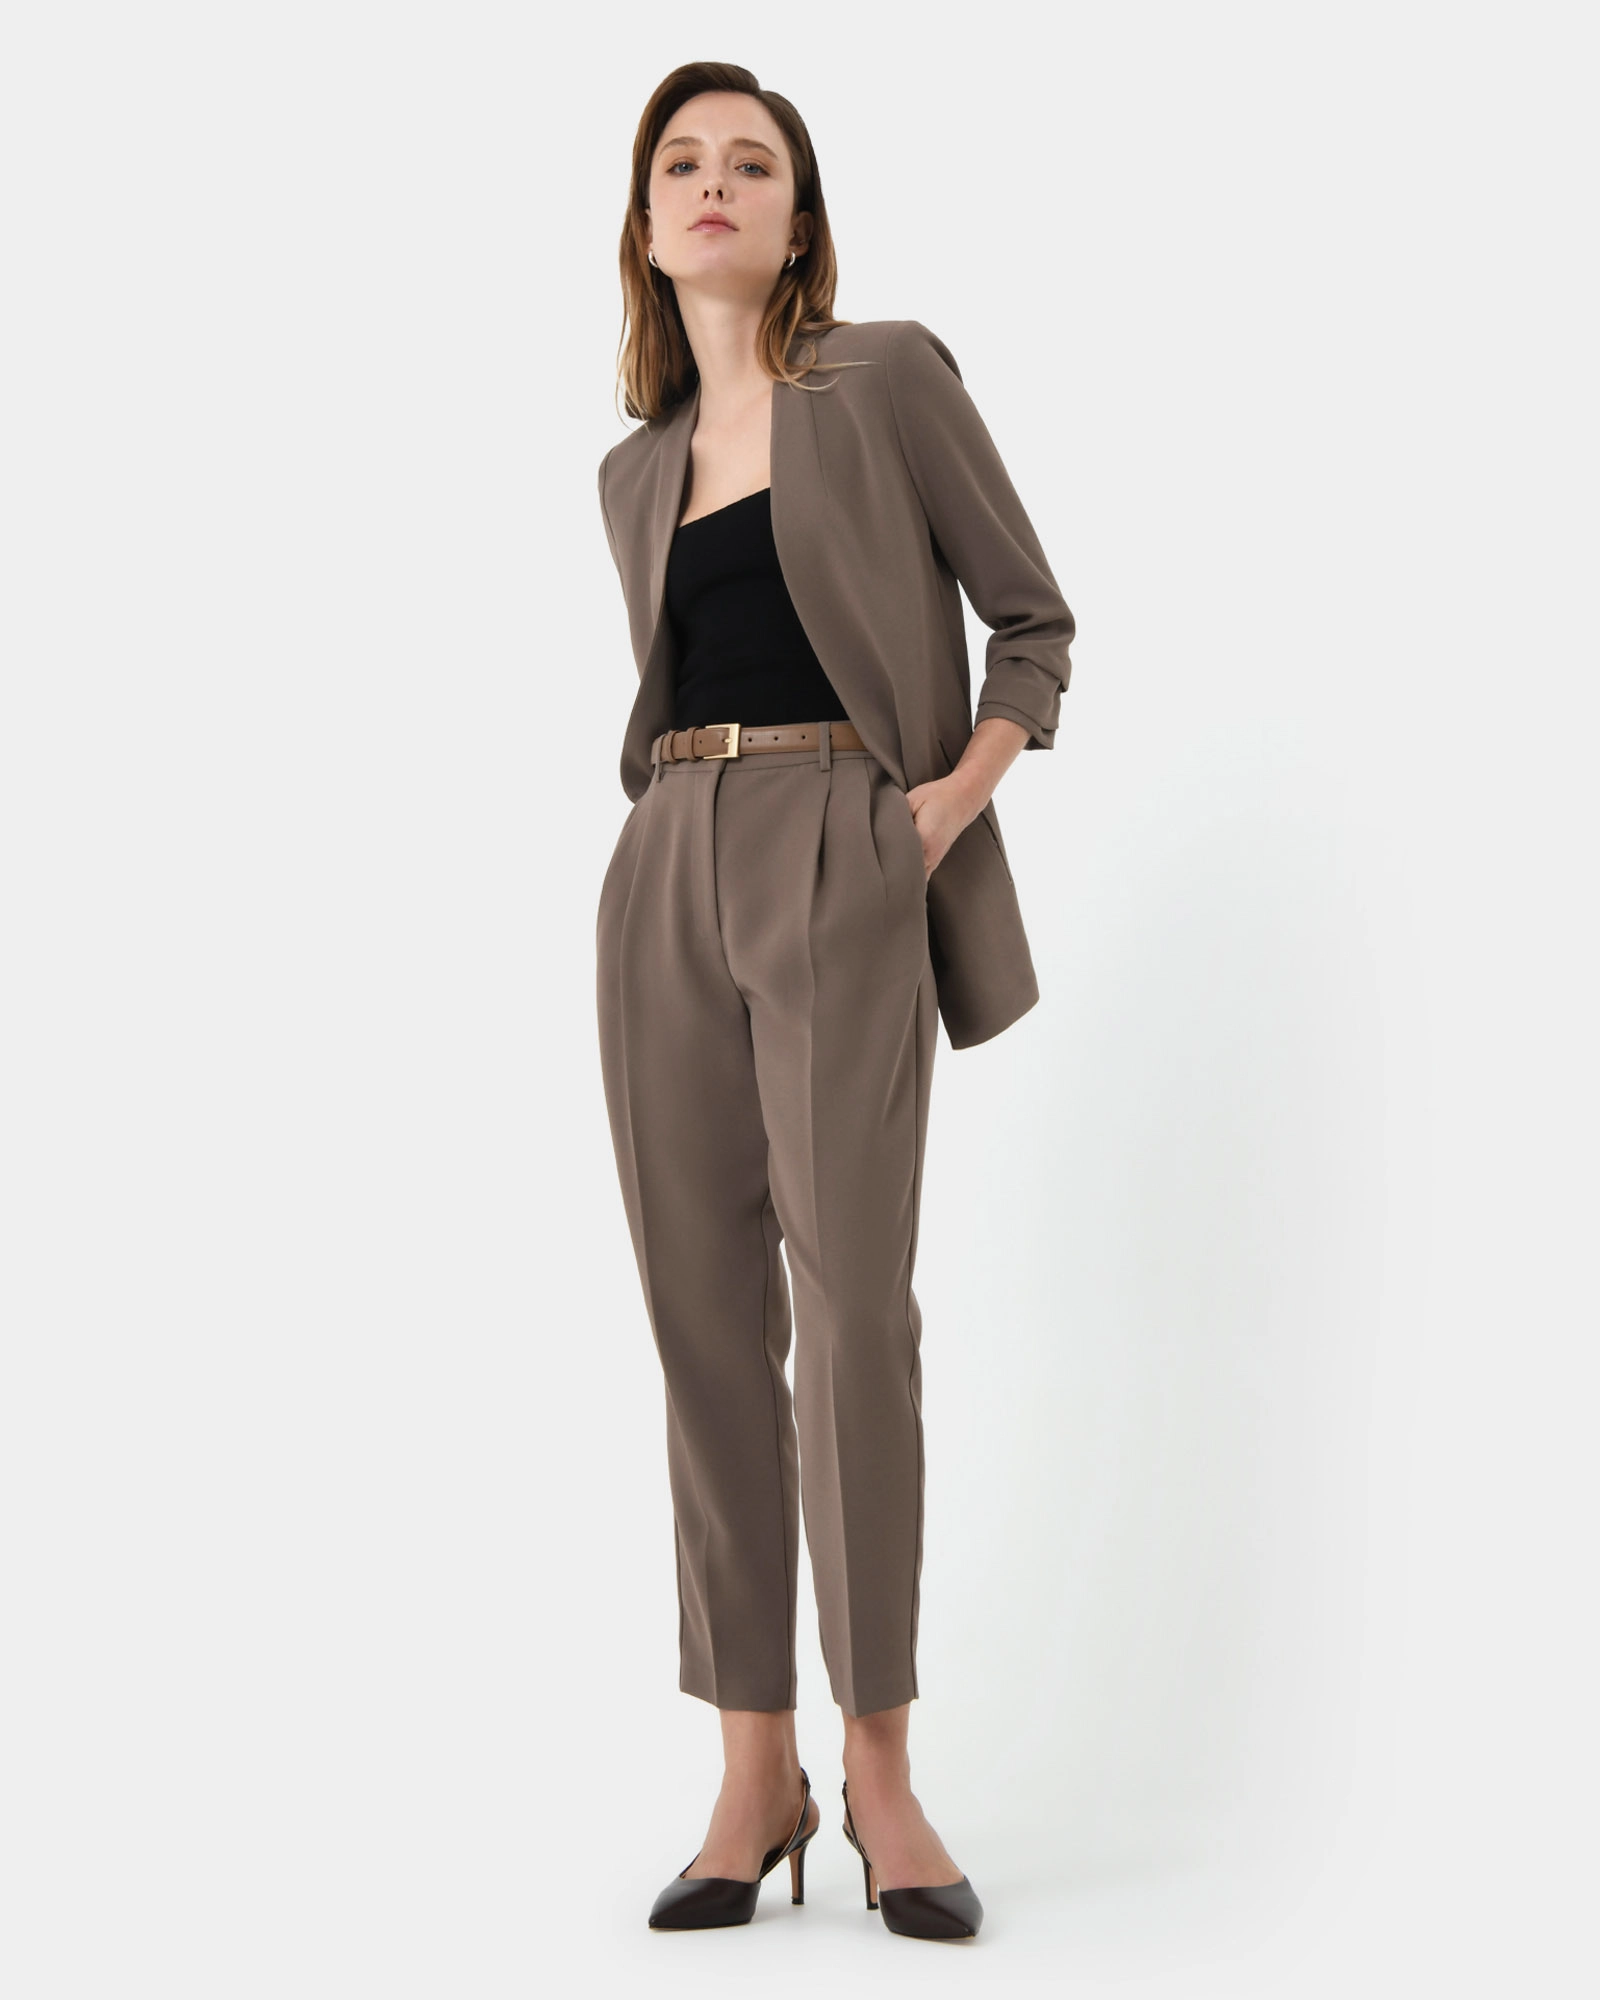 Shop Womens Suits, Jackets and Trousers Online in Australia